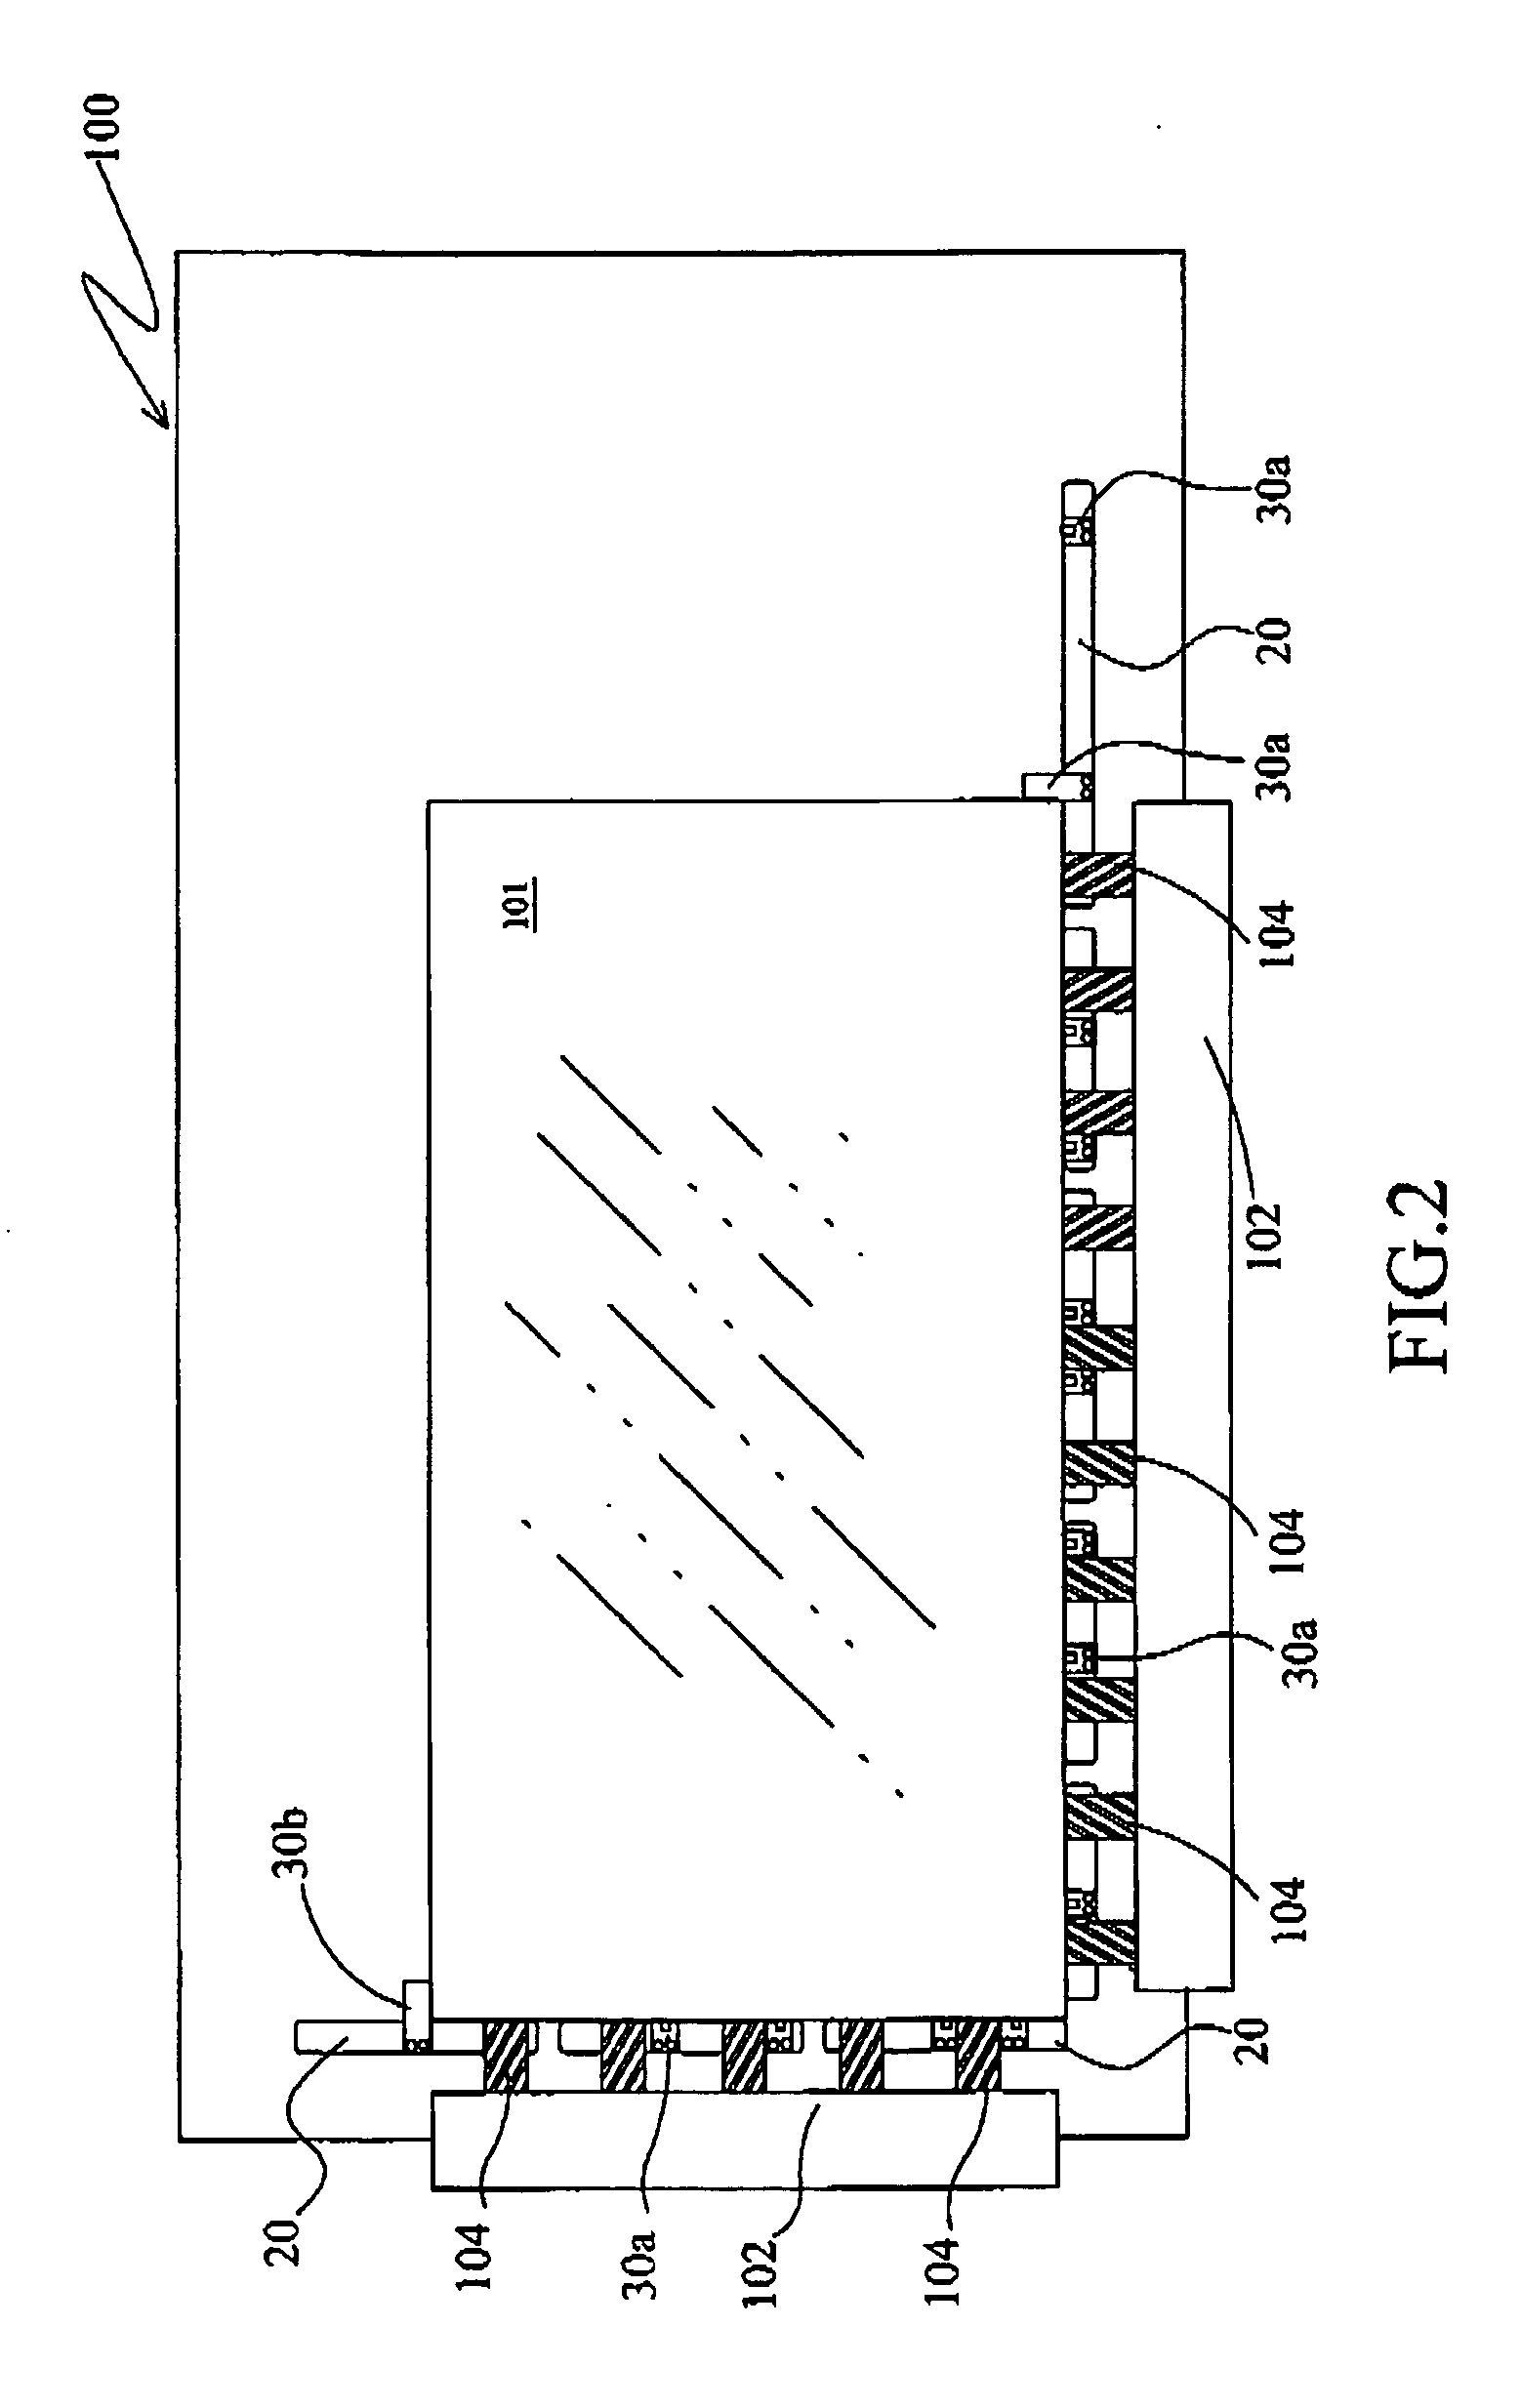 Panel positioning device